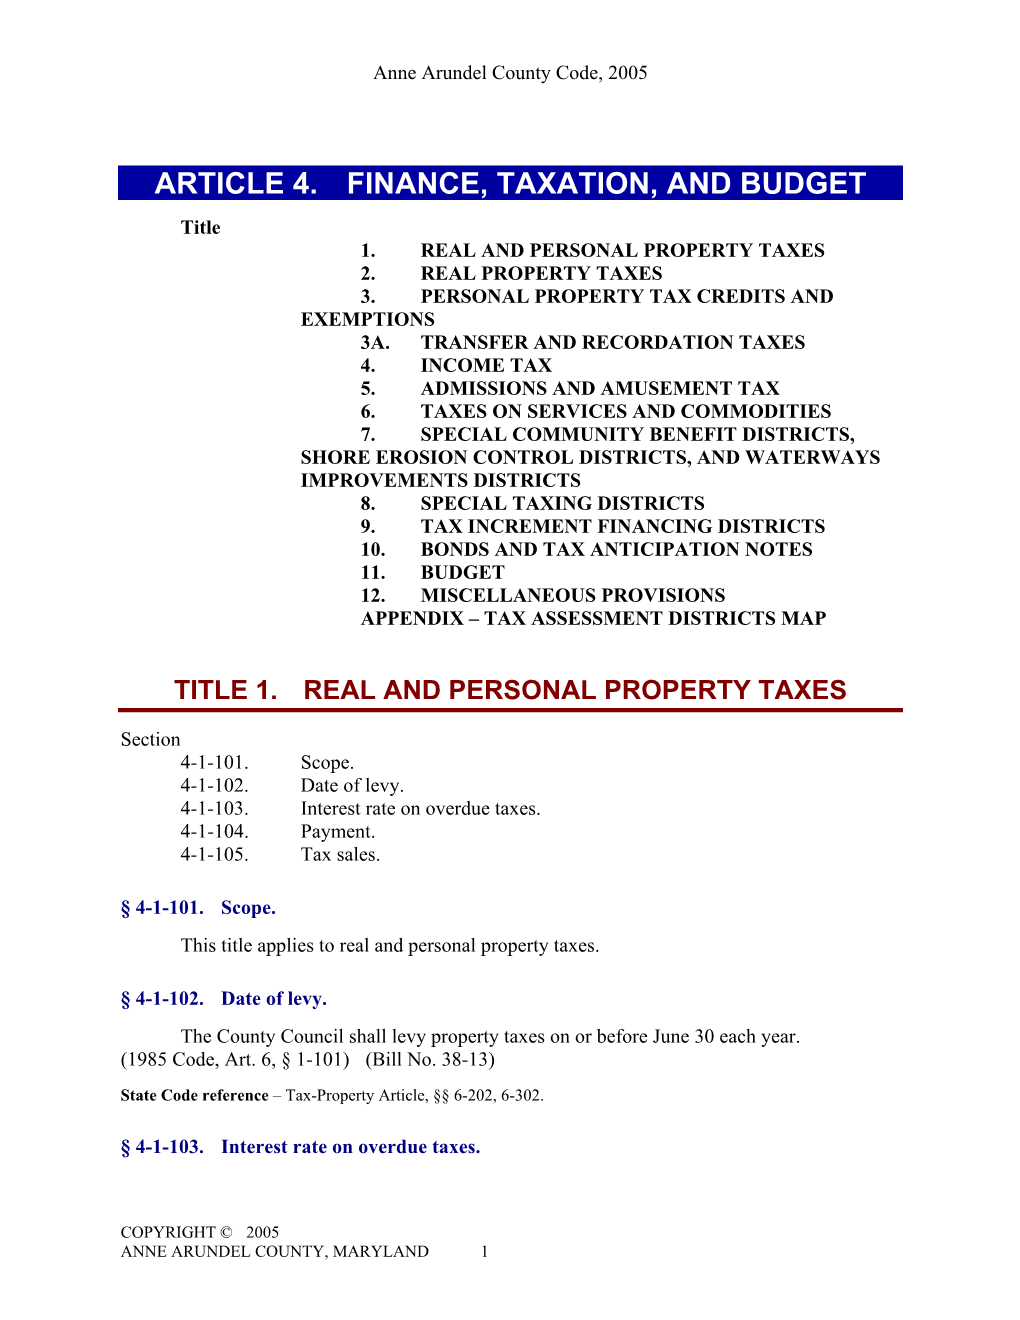 ARTICLE 4. FINANCE, TAXATION, and BUDGET Title 1